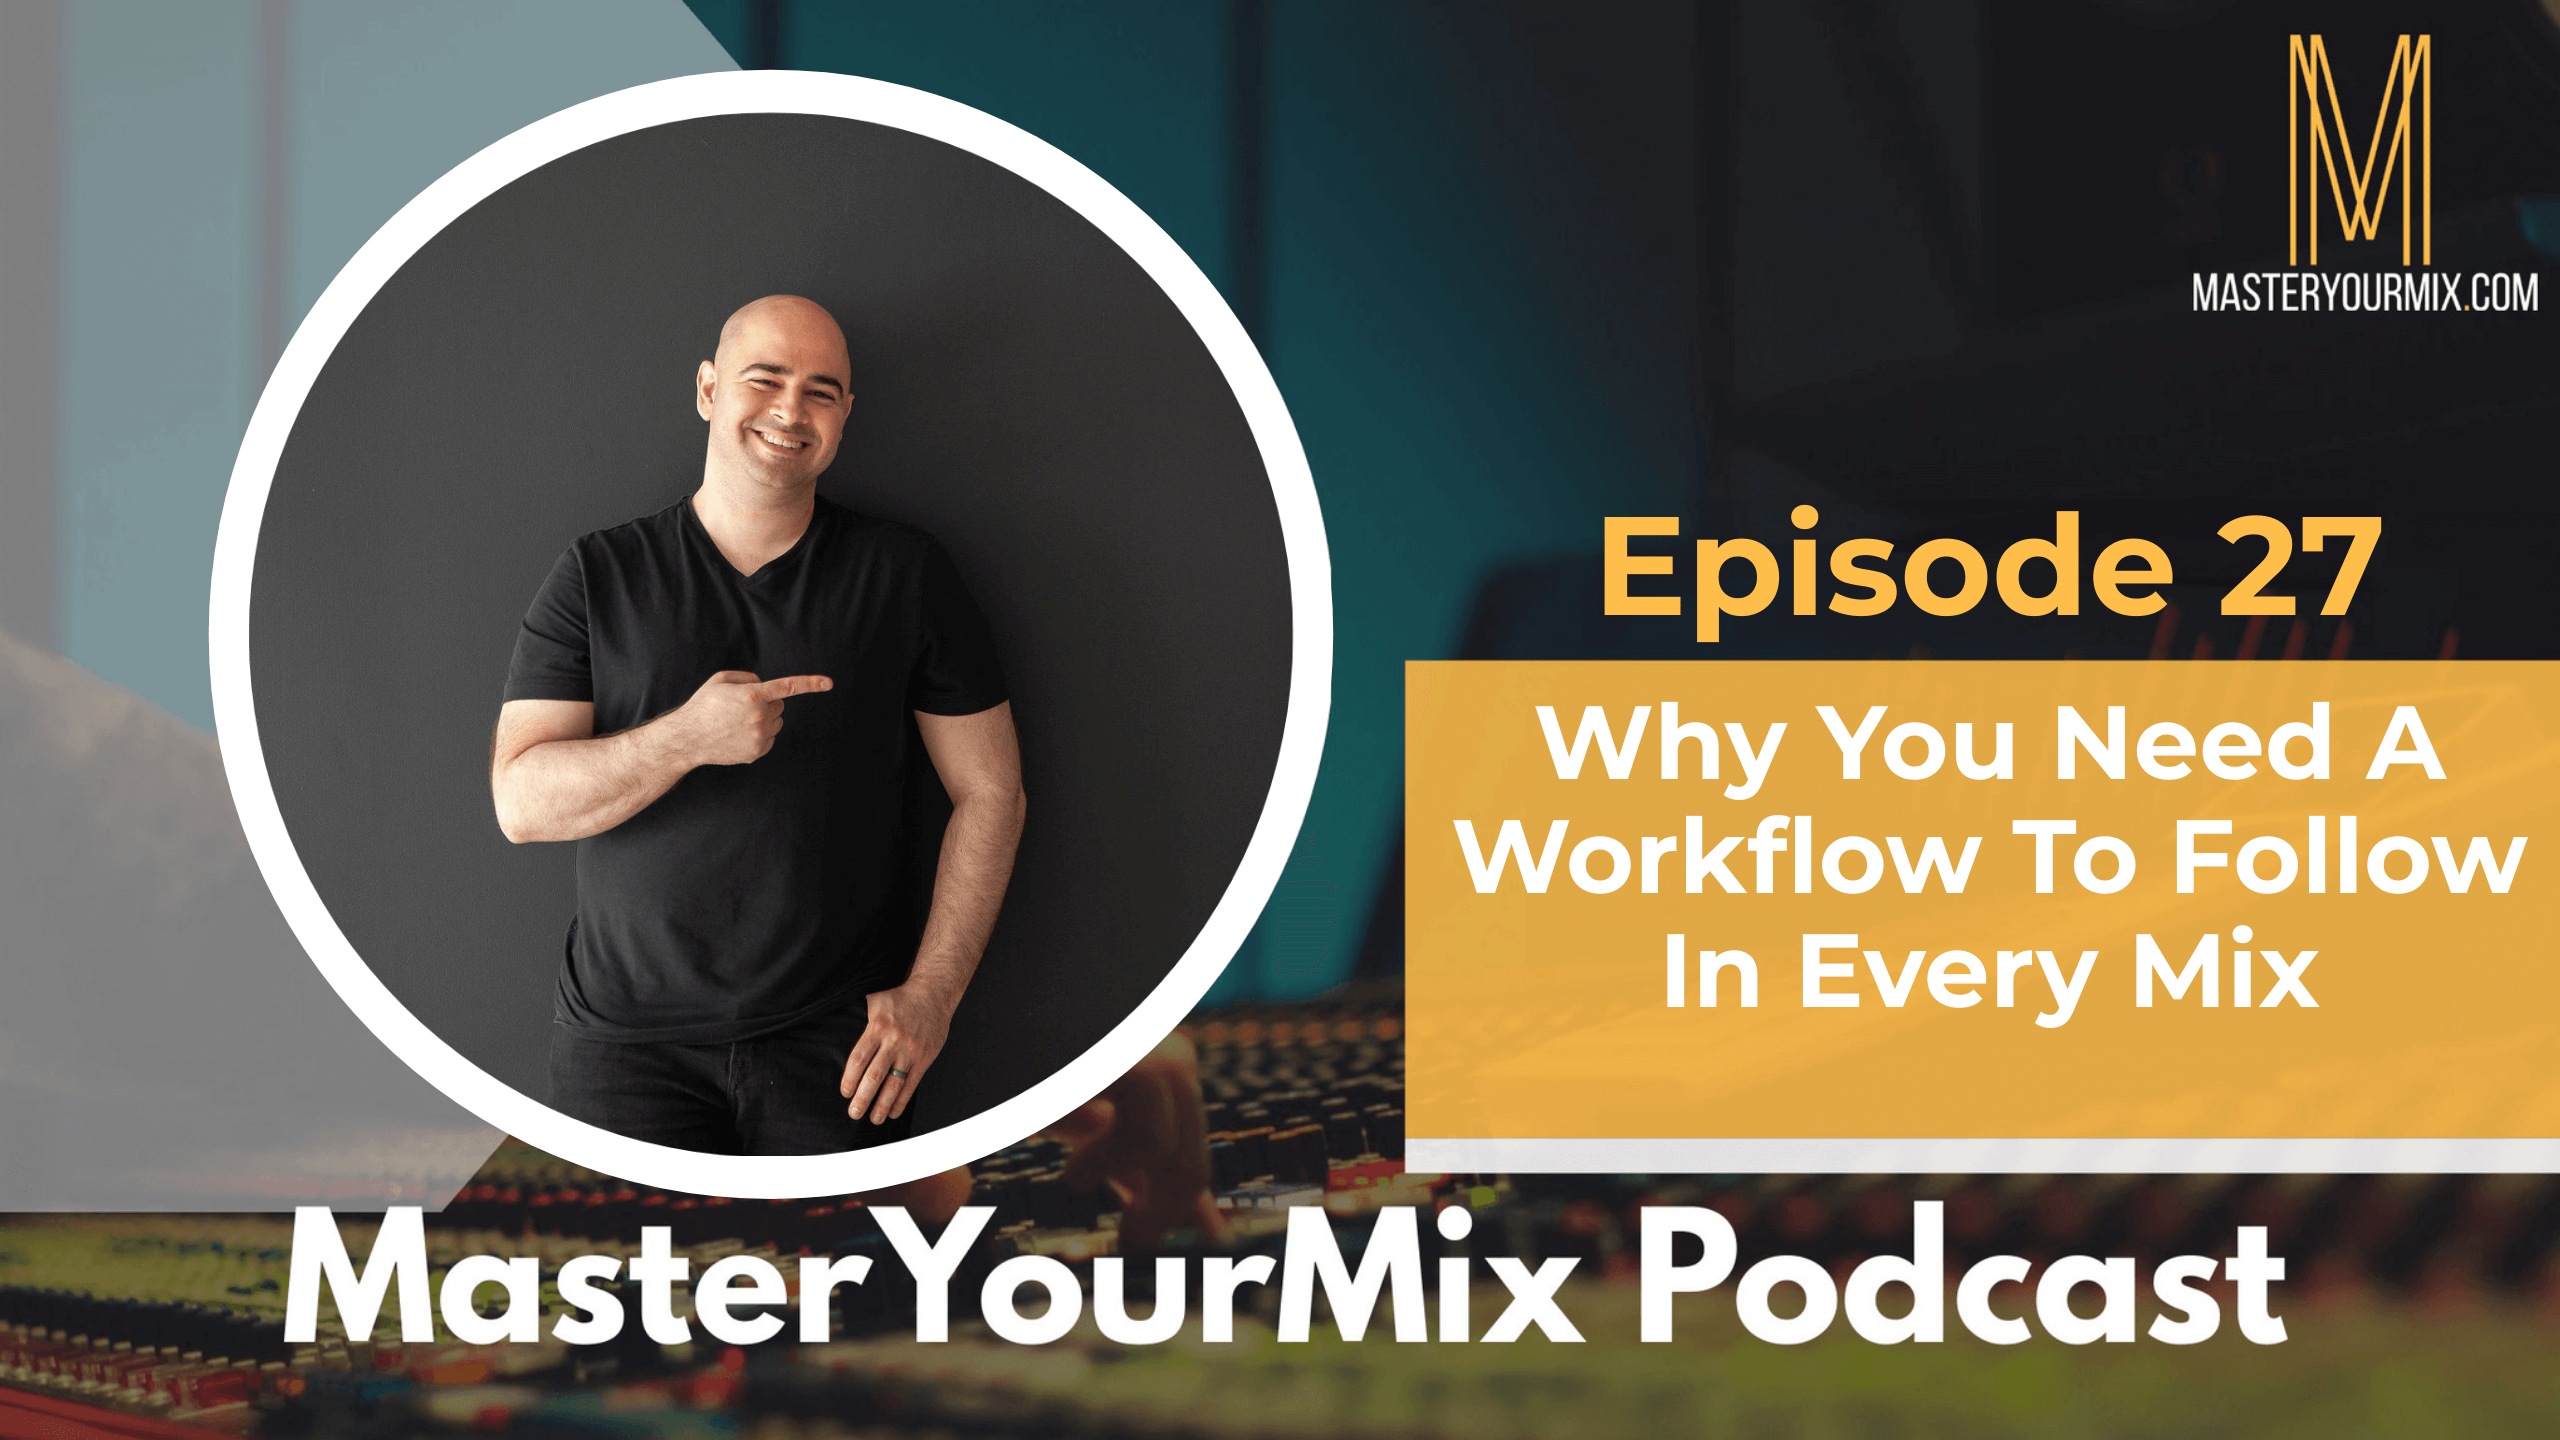 master your mix podcast, ep 27 mike indovina